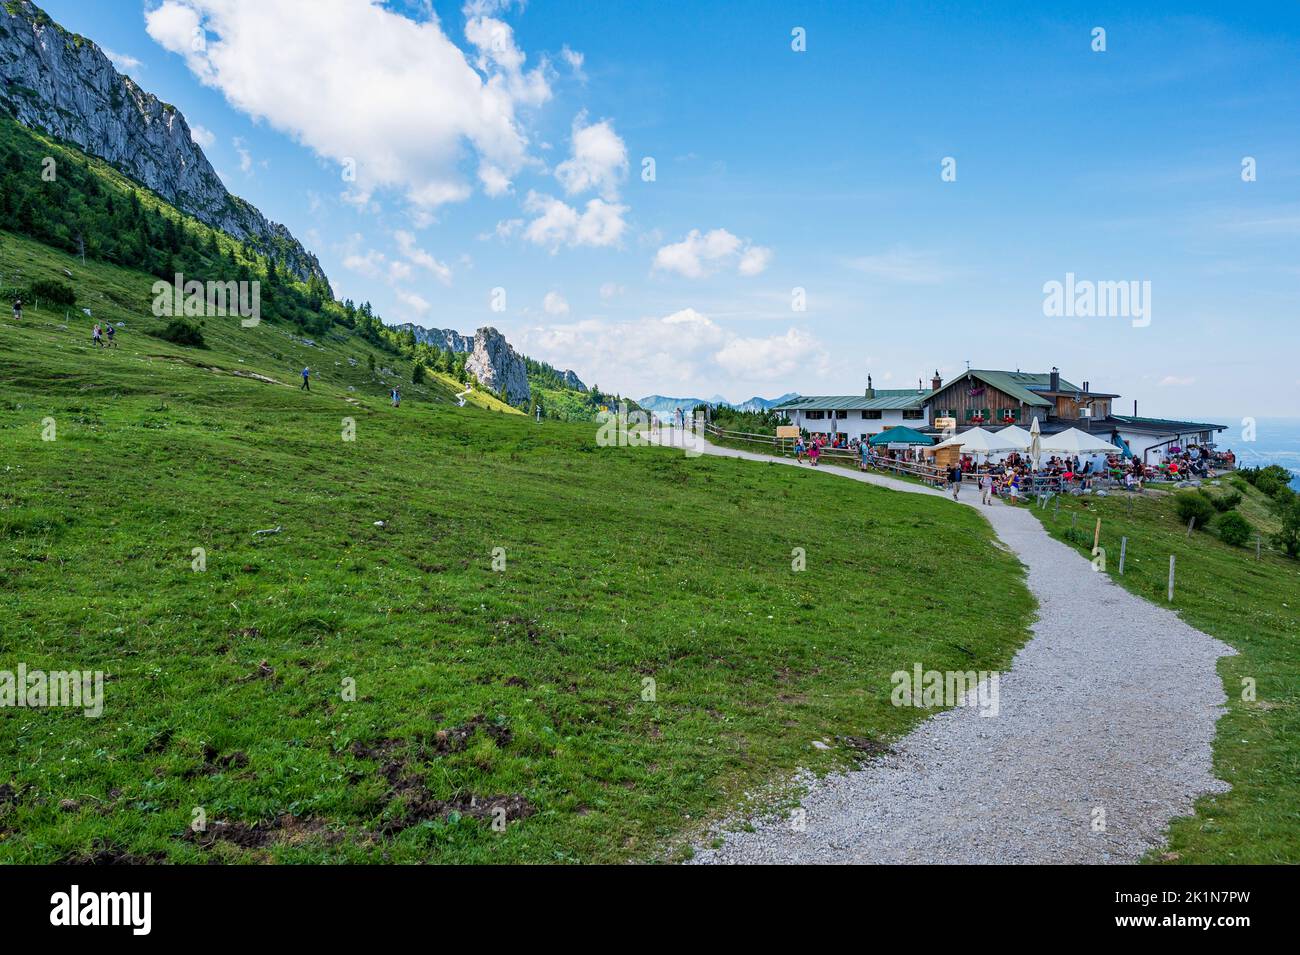 Aschau, Bavaria, Germany - July 14, 2020: tourists visiting the Steinlingalm in front of the Kampenwand, a mountain in Bavaria, Germany Stock Photo